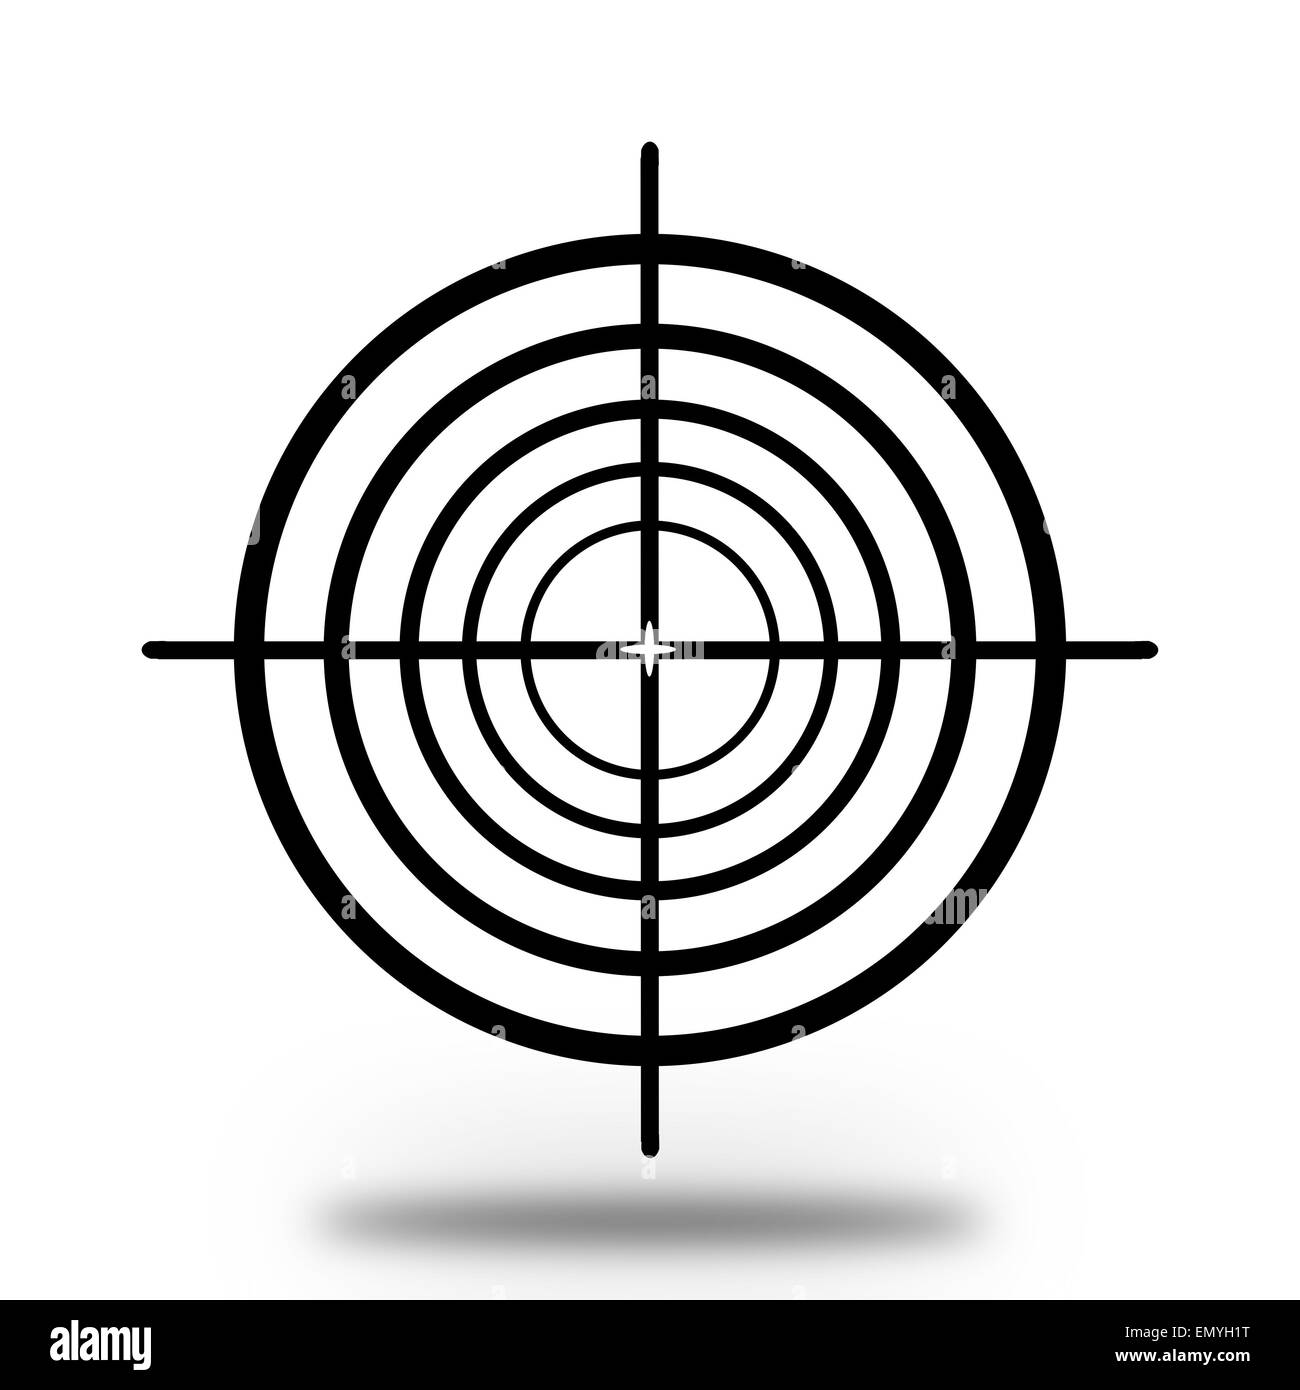 Illustration of a black target sight over white. Stock Photo